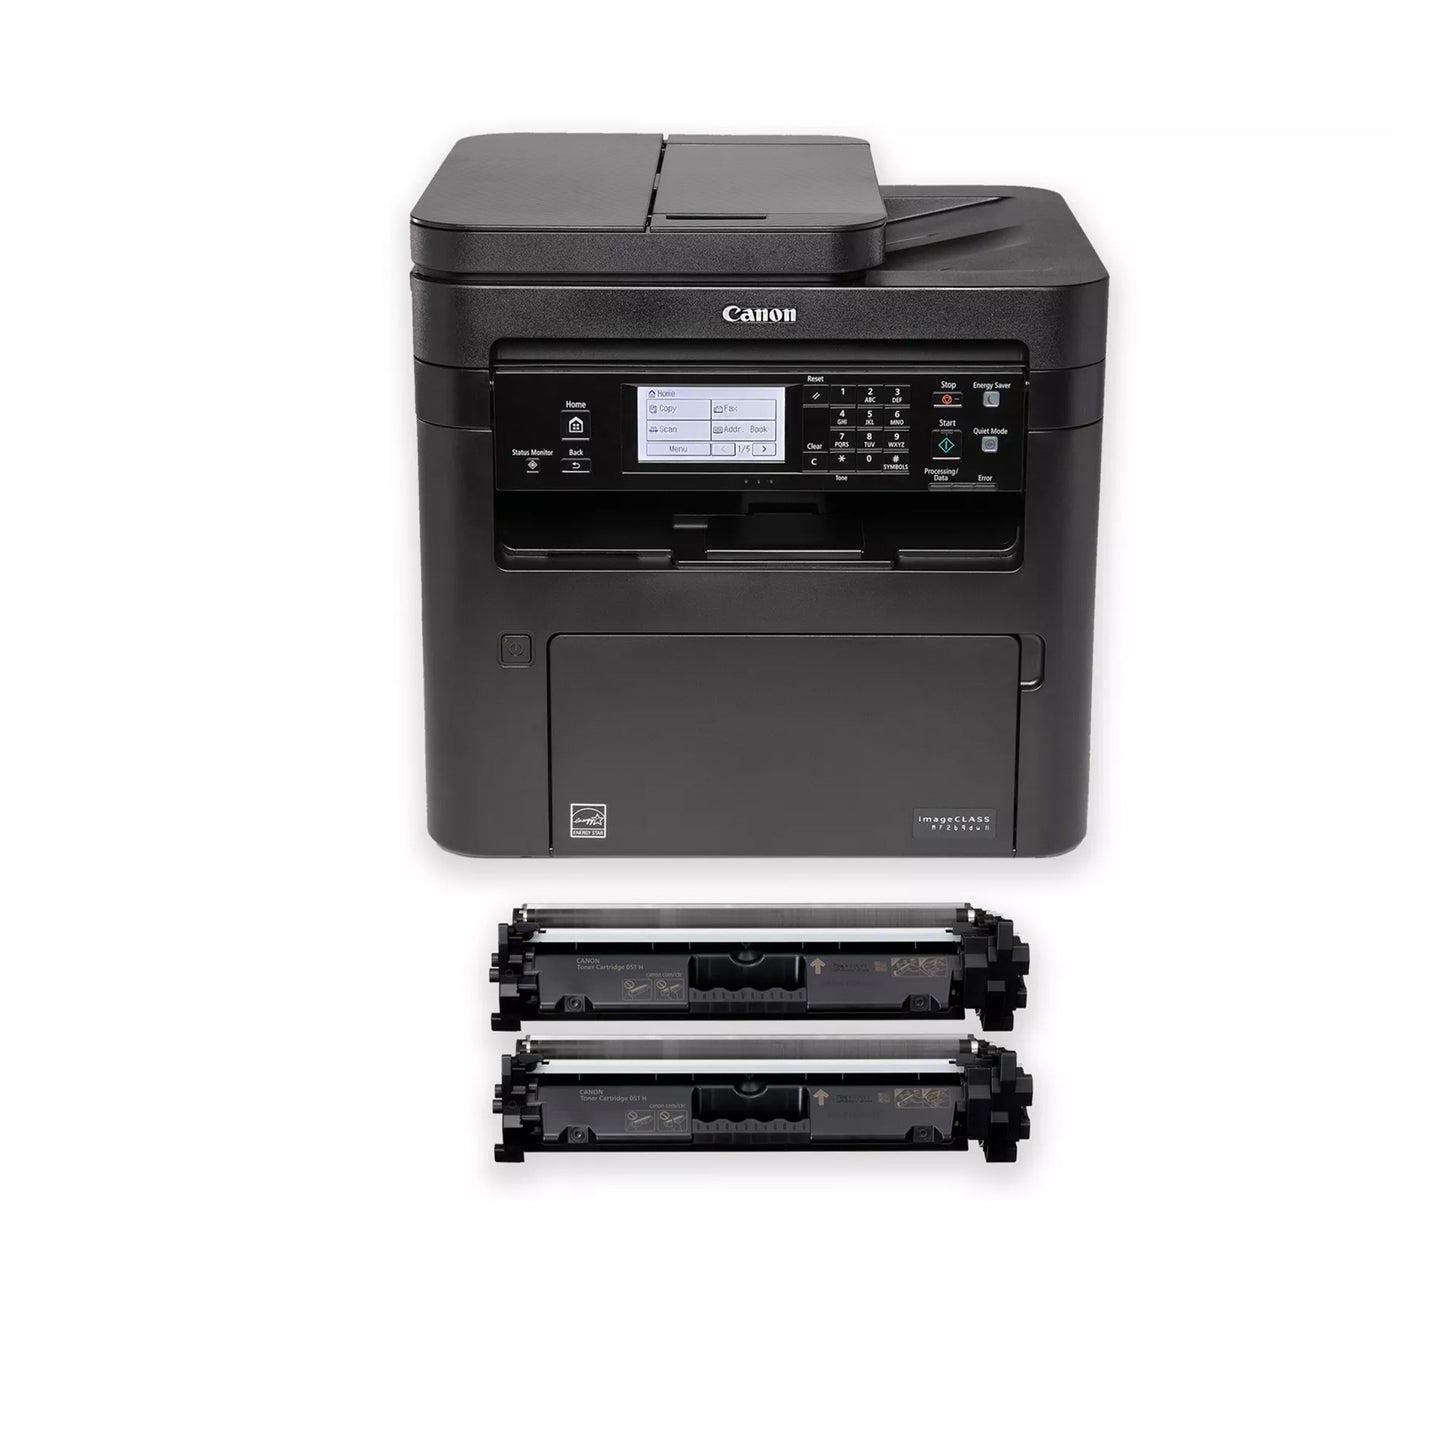 Canon imageCLASS MF269dw II - Print, Copy, Scan, Fax, Wireless, 2-Sided Laser Printer with Auto Document Feeder, Works with Alexa